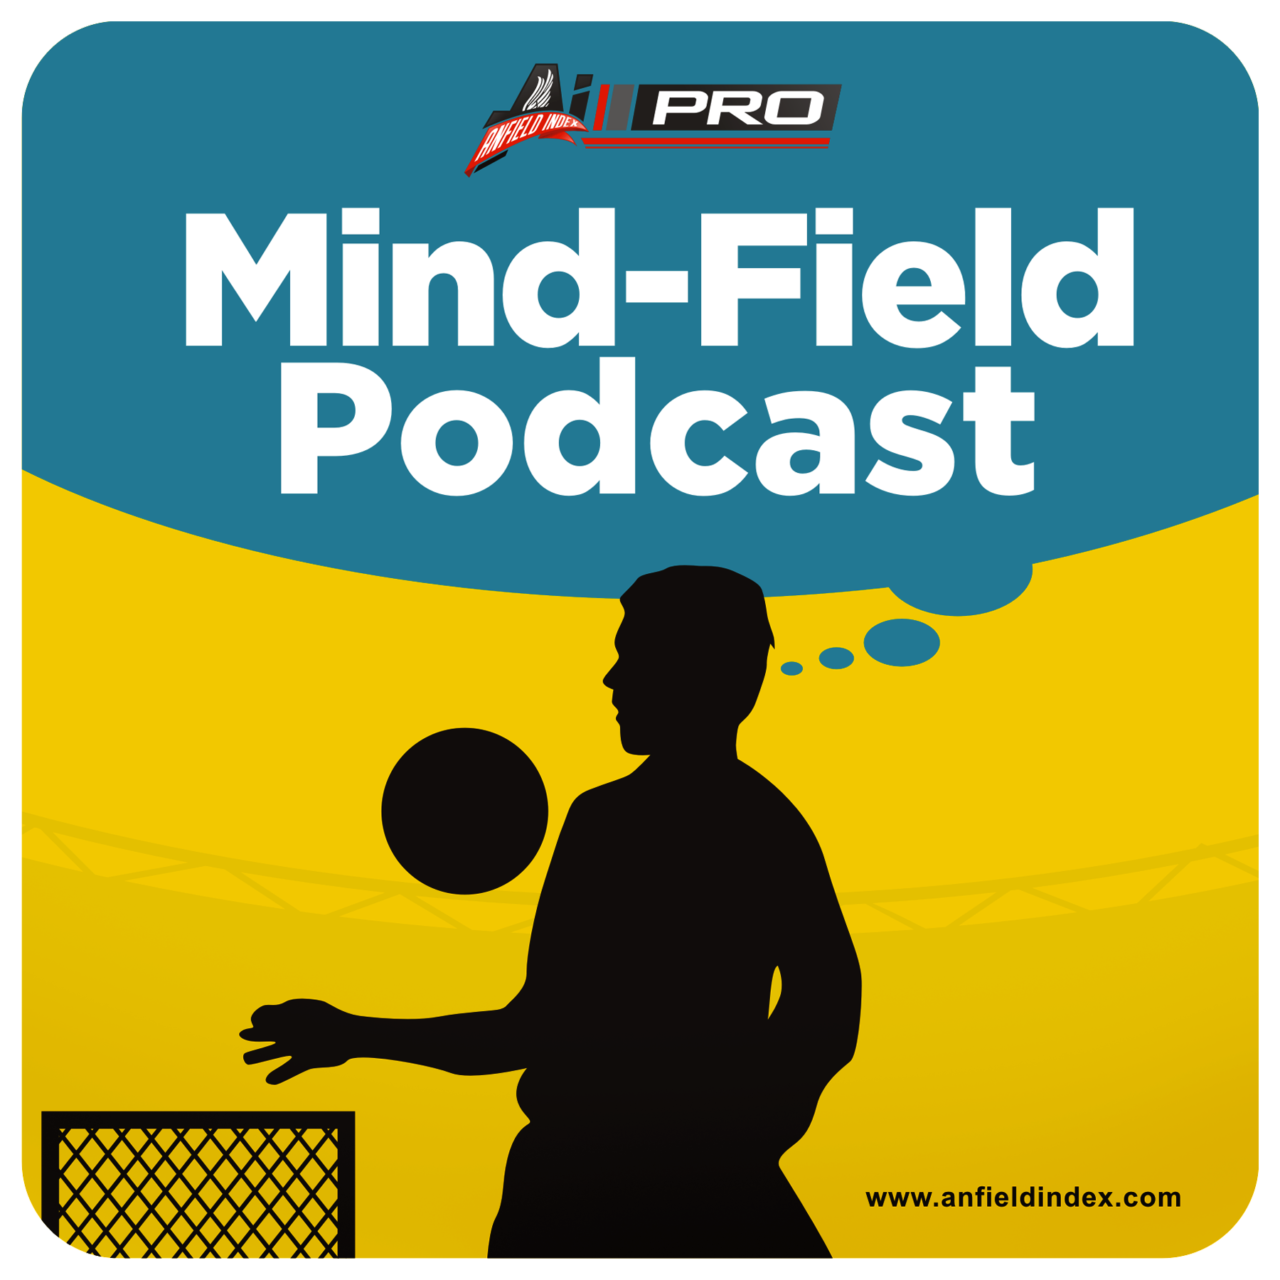 The Mind-Field Podcast: Surviving the Ups and Downs - Episode 18